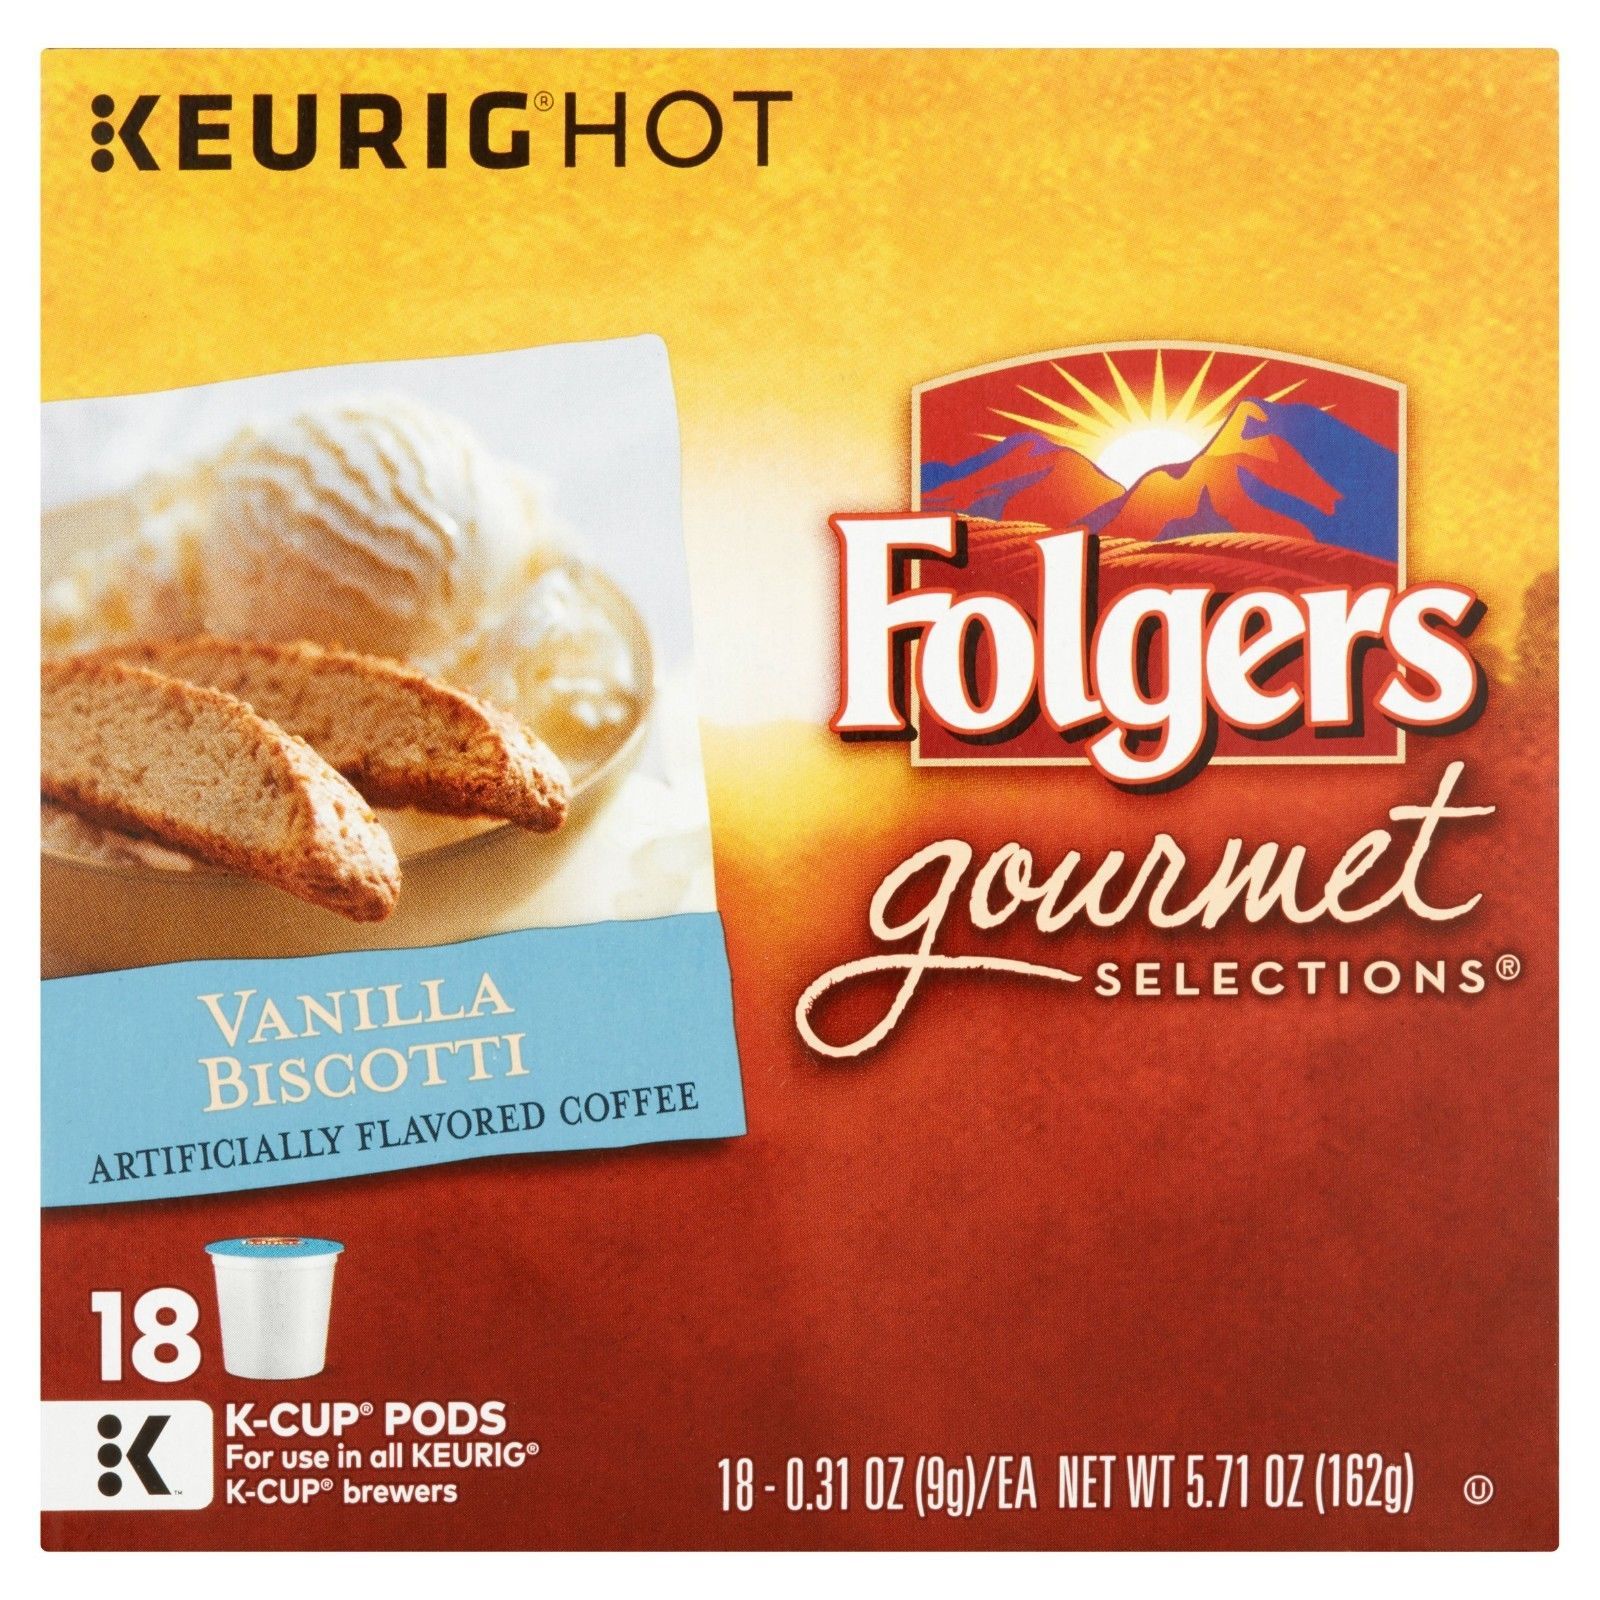 Folgers French Vanilla Biscotti Coffee 18 to 144 Keurig K cup Pods Pick Quantity - $24.89 - $109.89